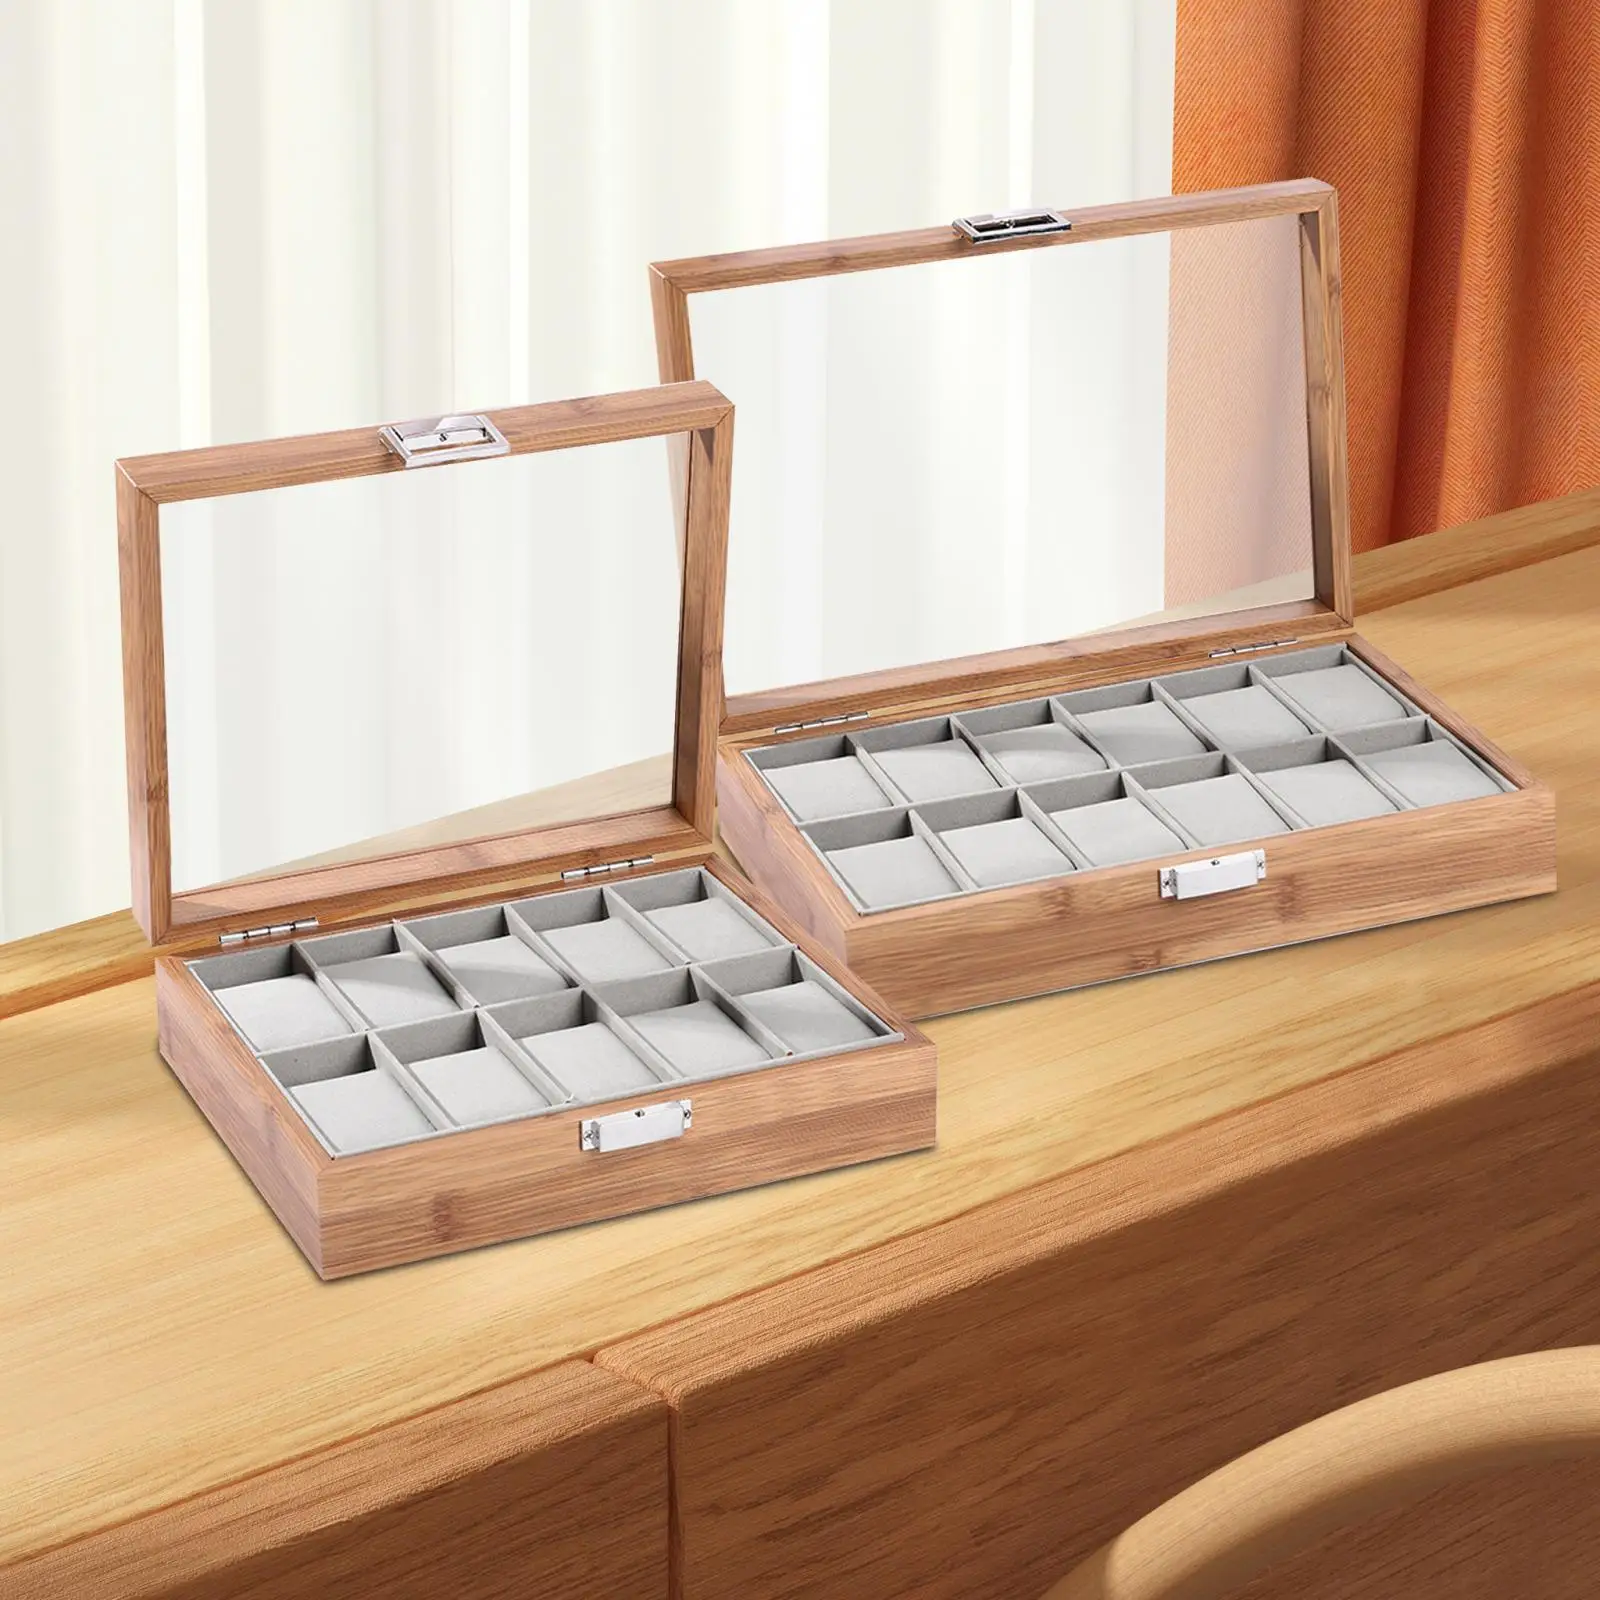 Watch Box Organizer with Lid Jewelry Display Case for Men and Women Home Decor Watches Necklace Bracelet Earrings Table Dresser